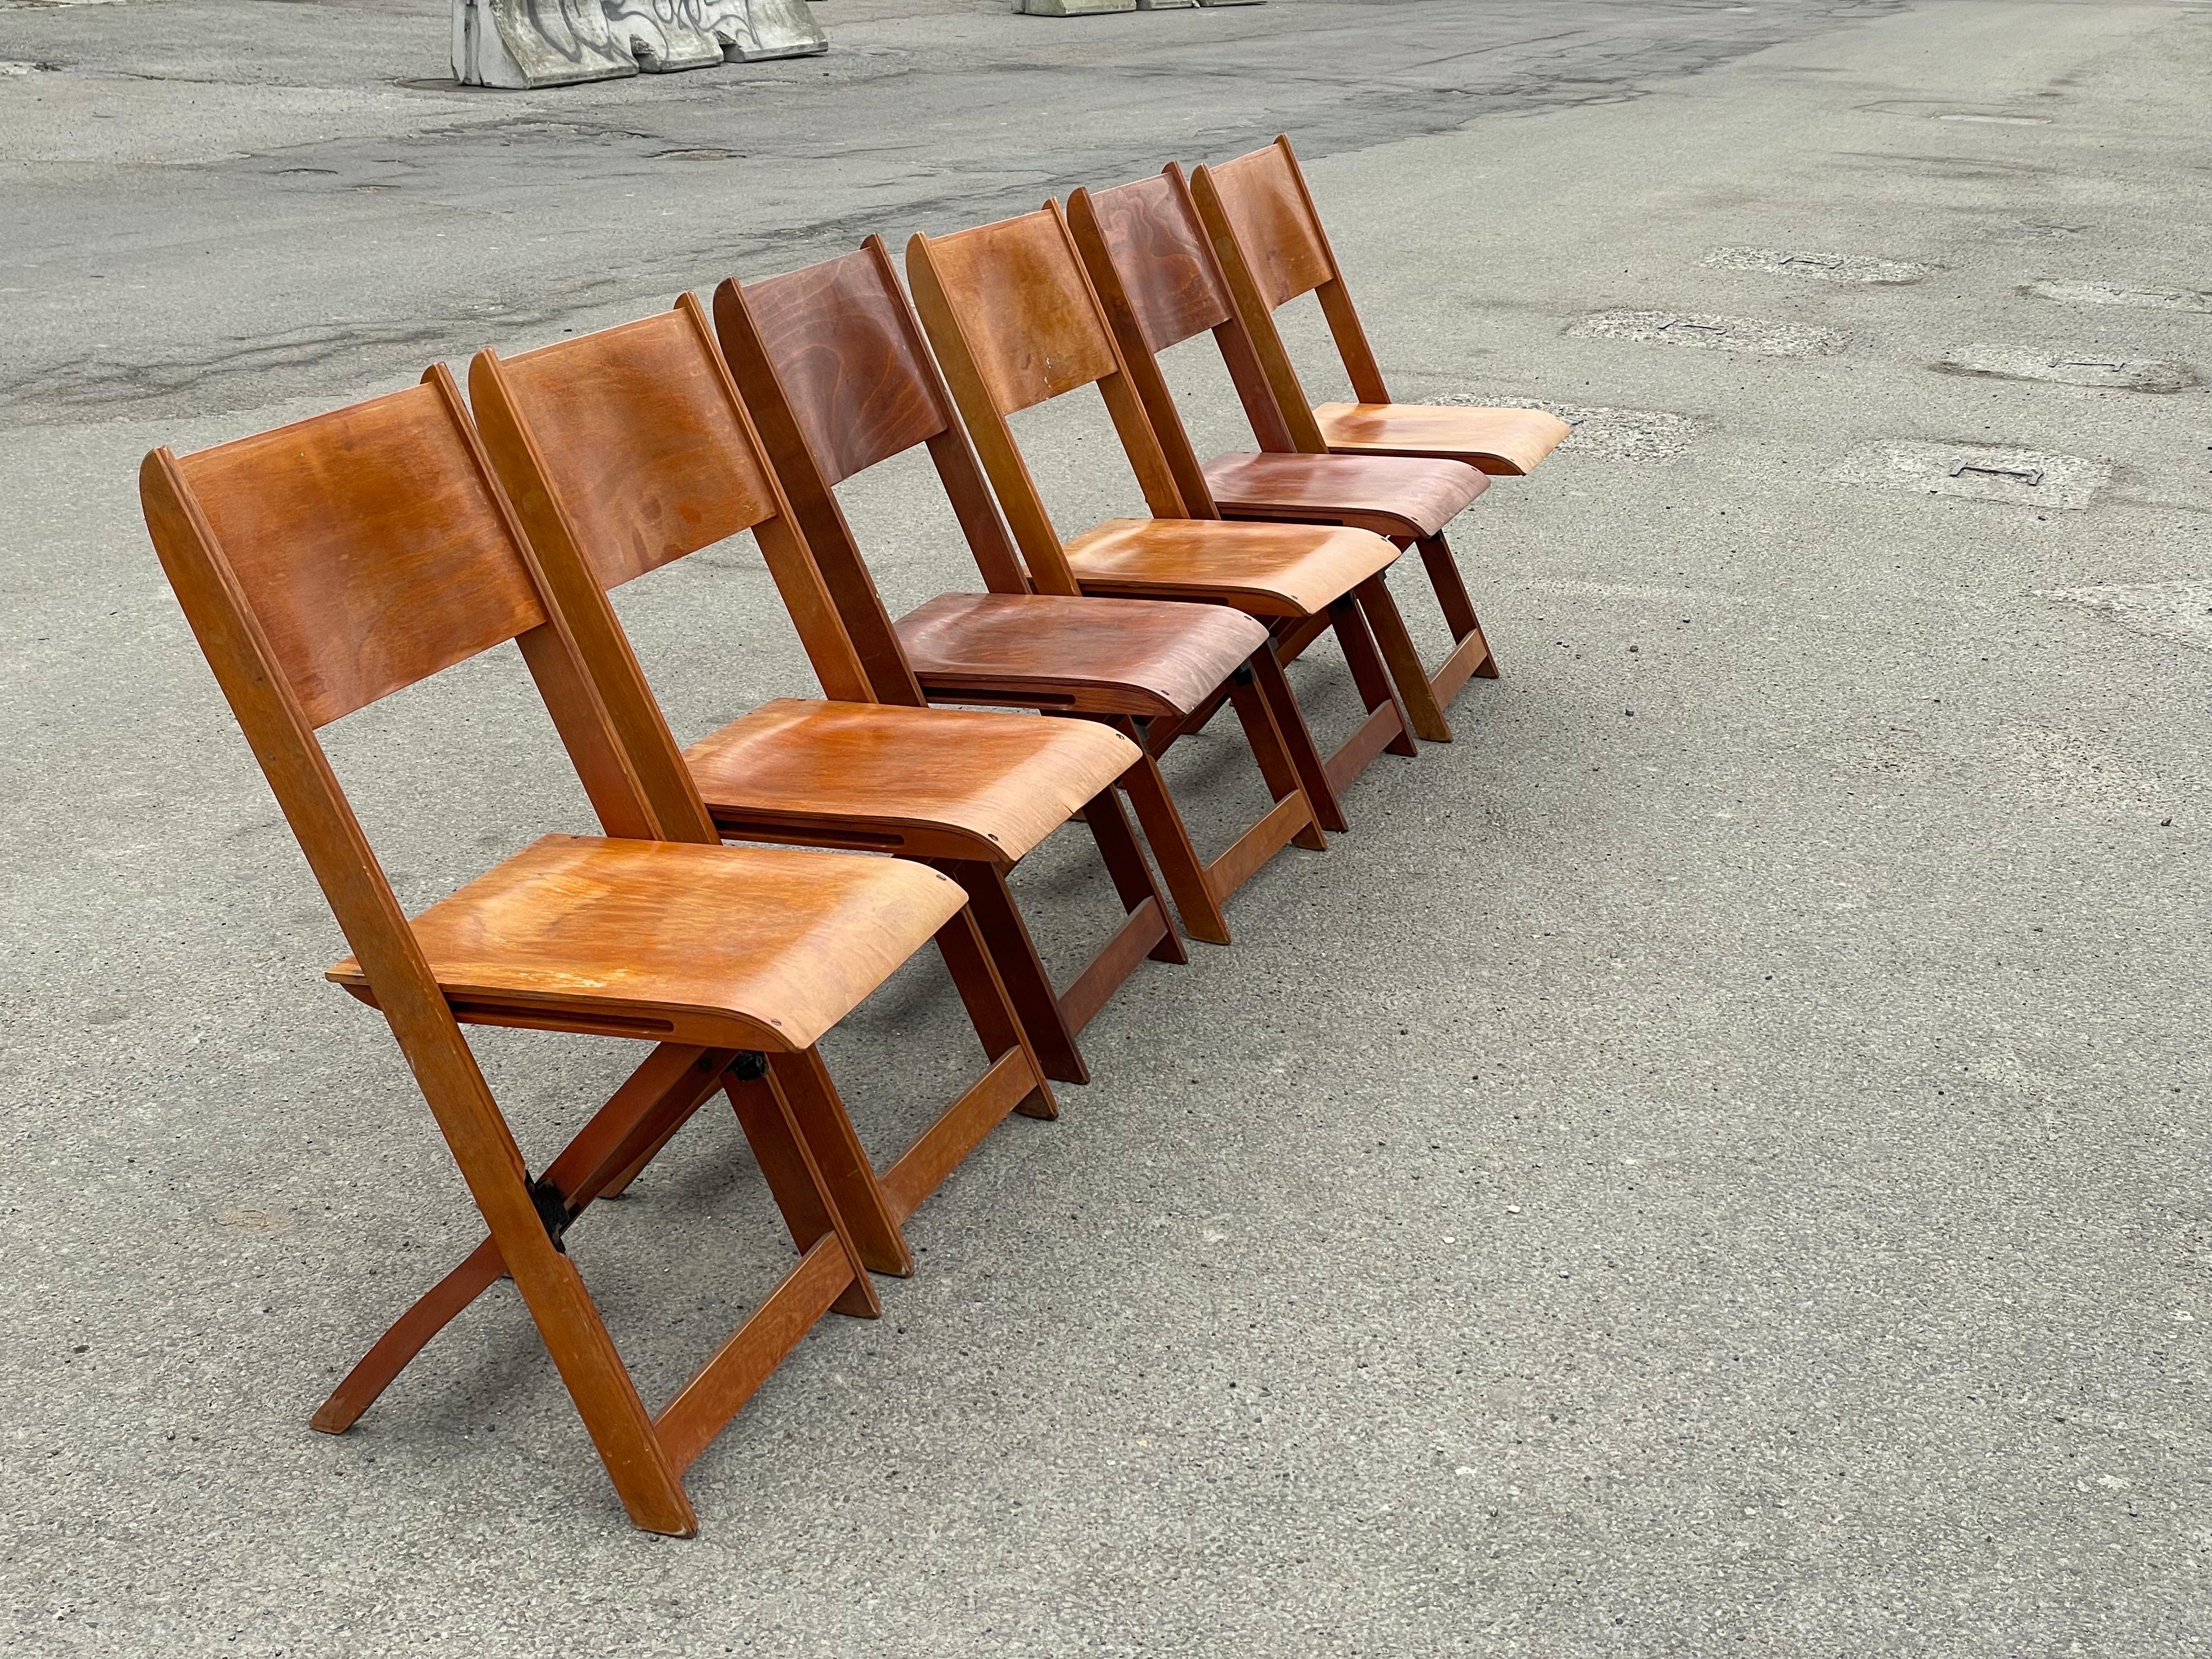 Mid-Century Modern Foldable Danish Chairs from 1930’s